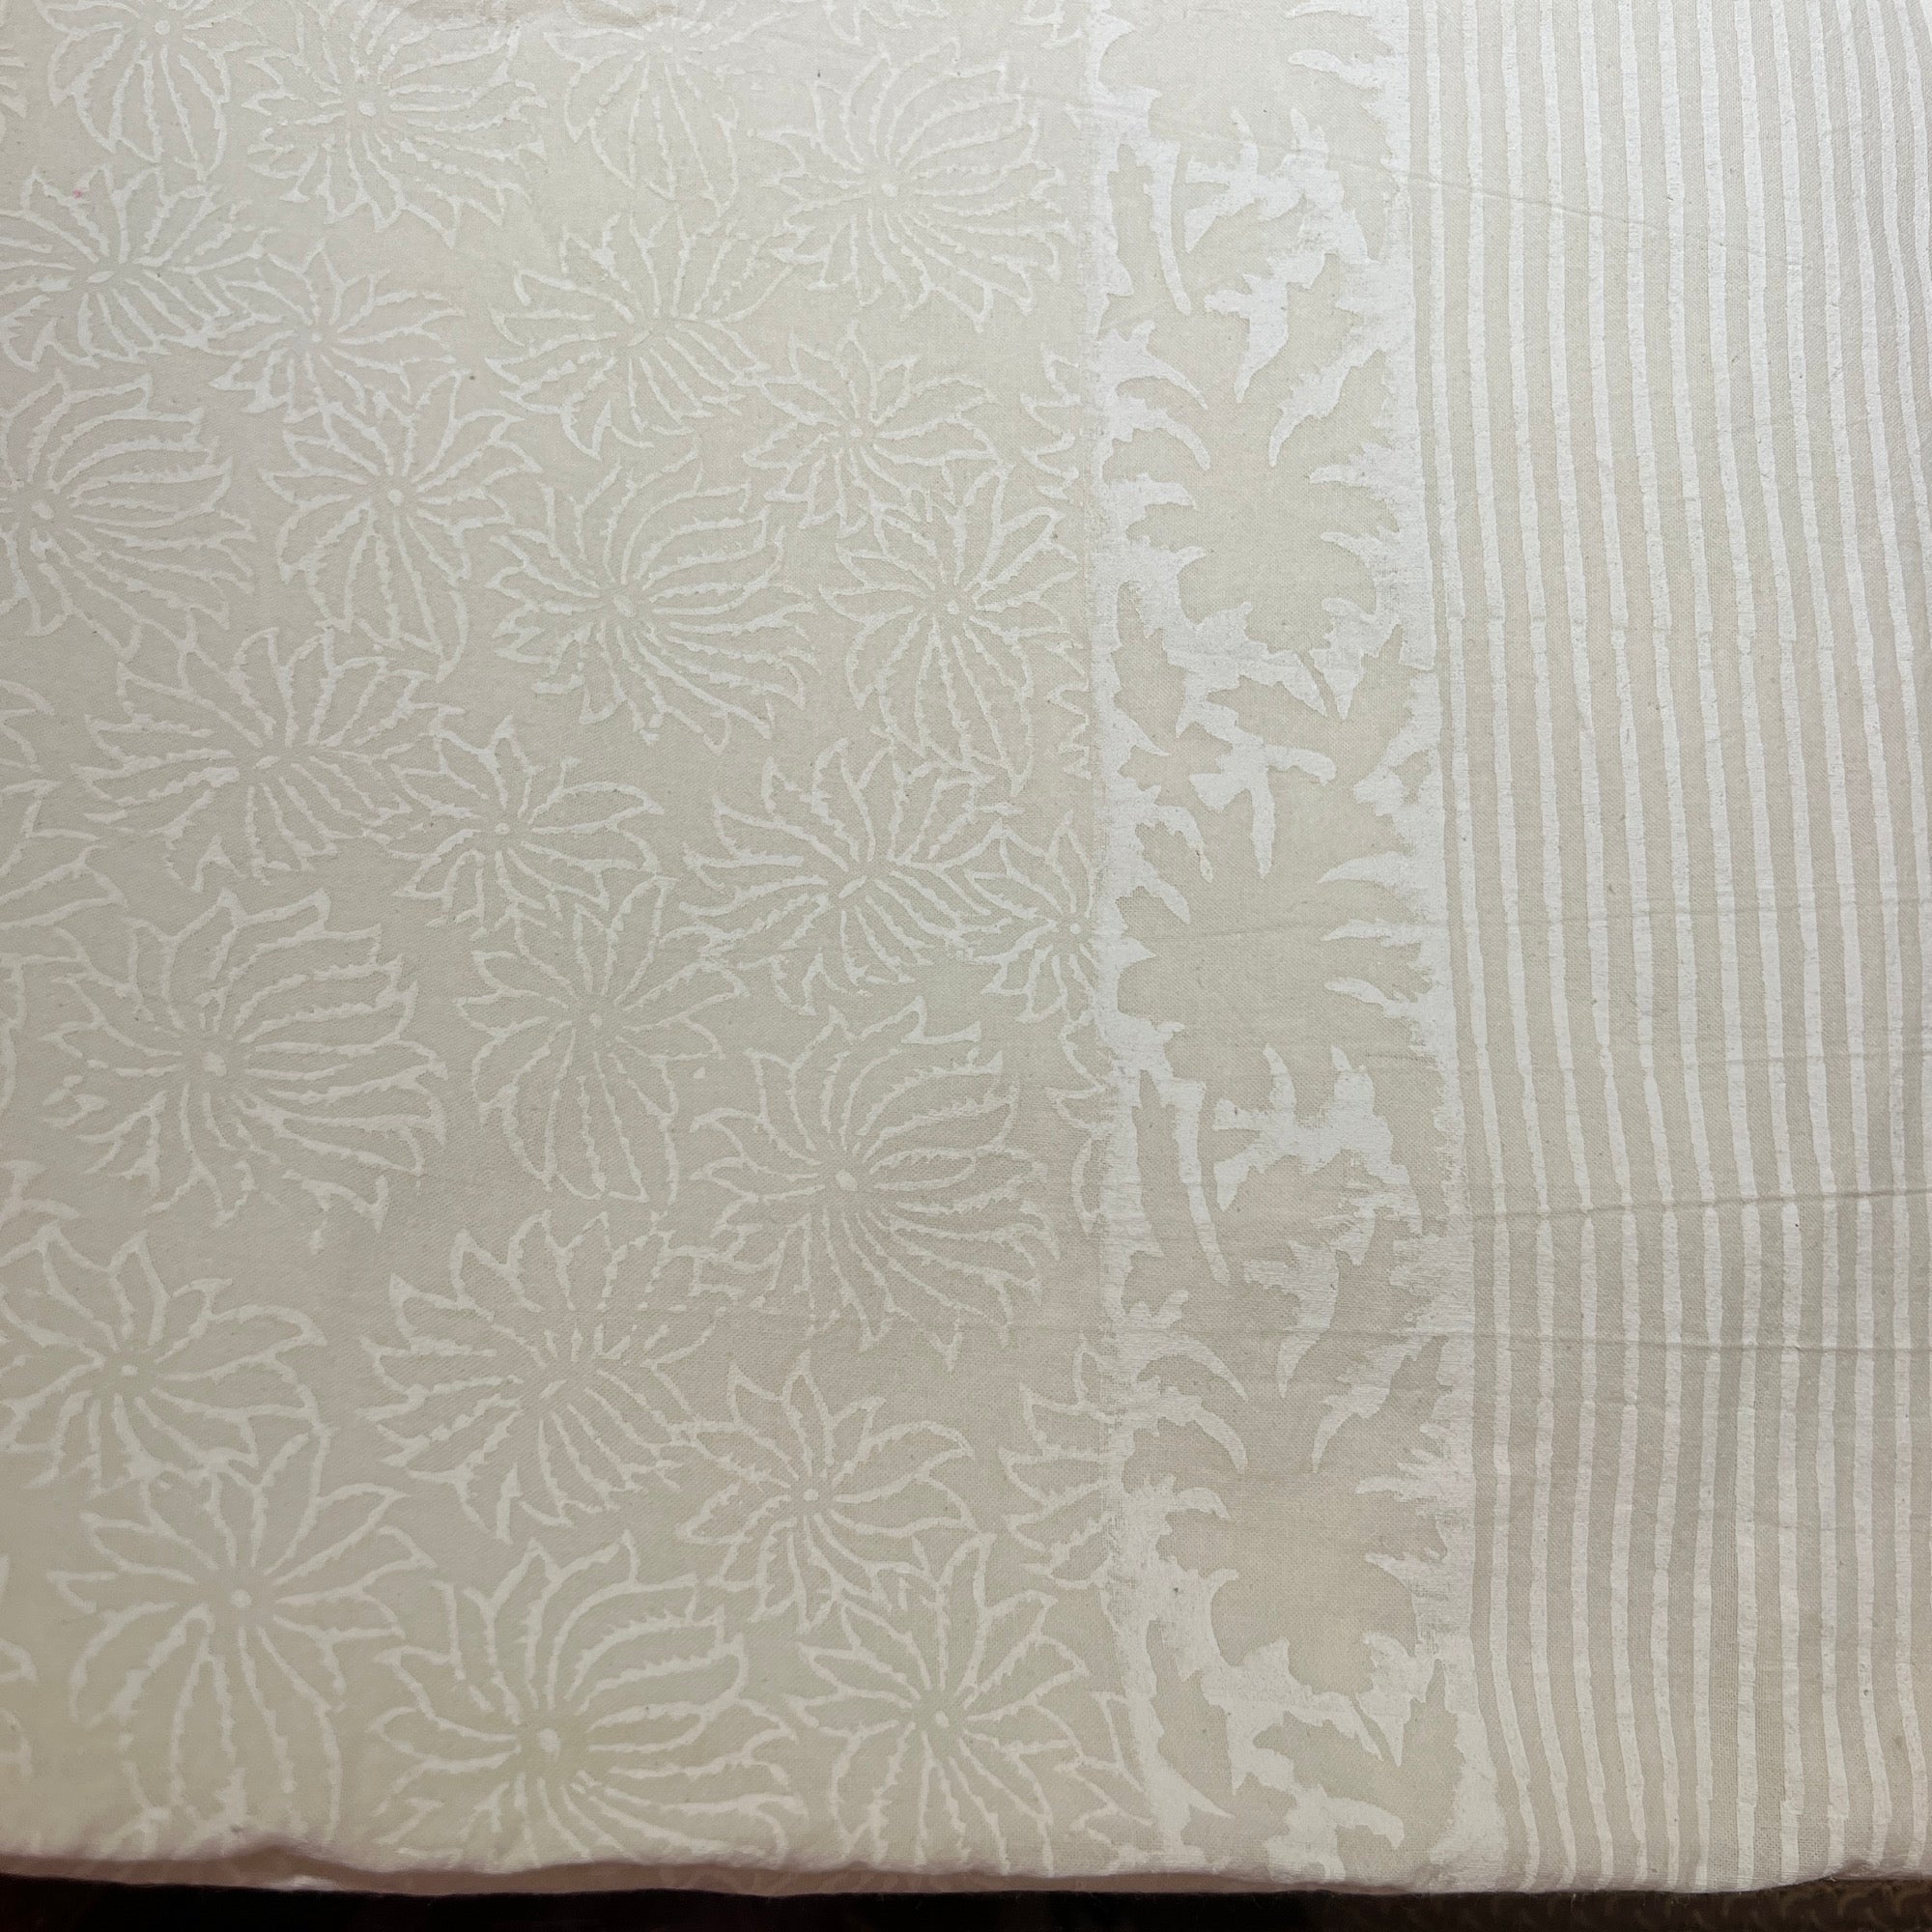 White on White Block Print Bed Cover - Vintage India NYC